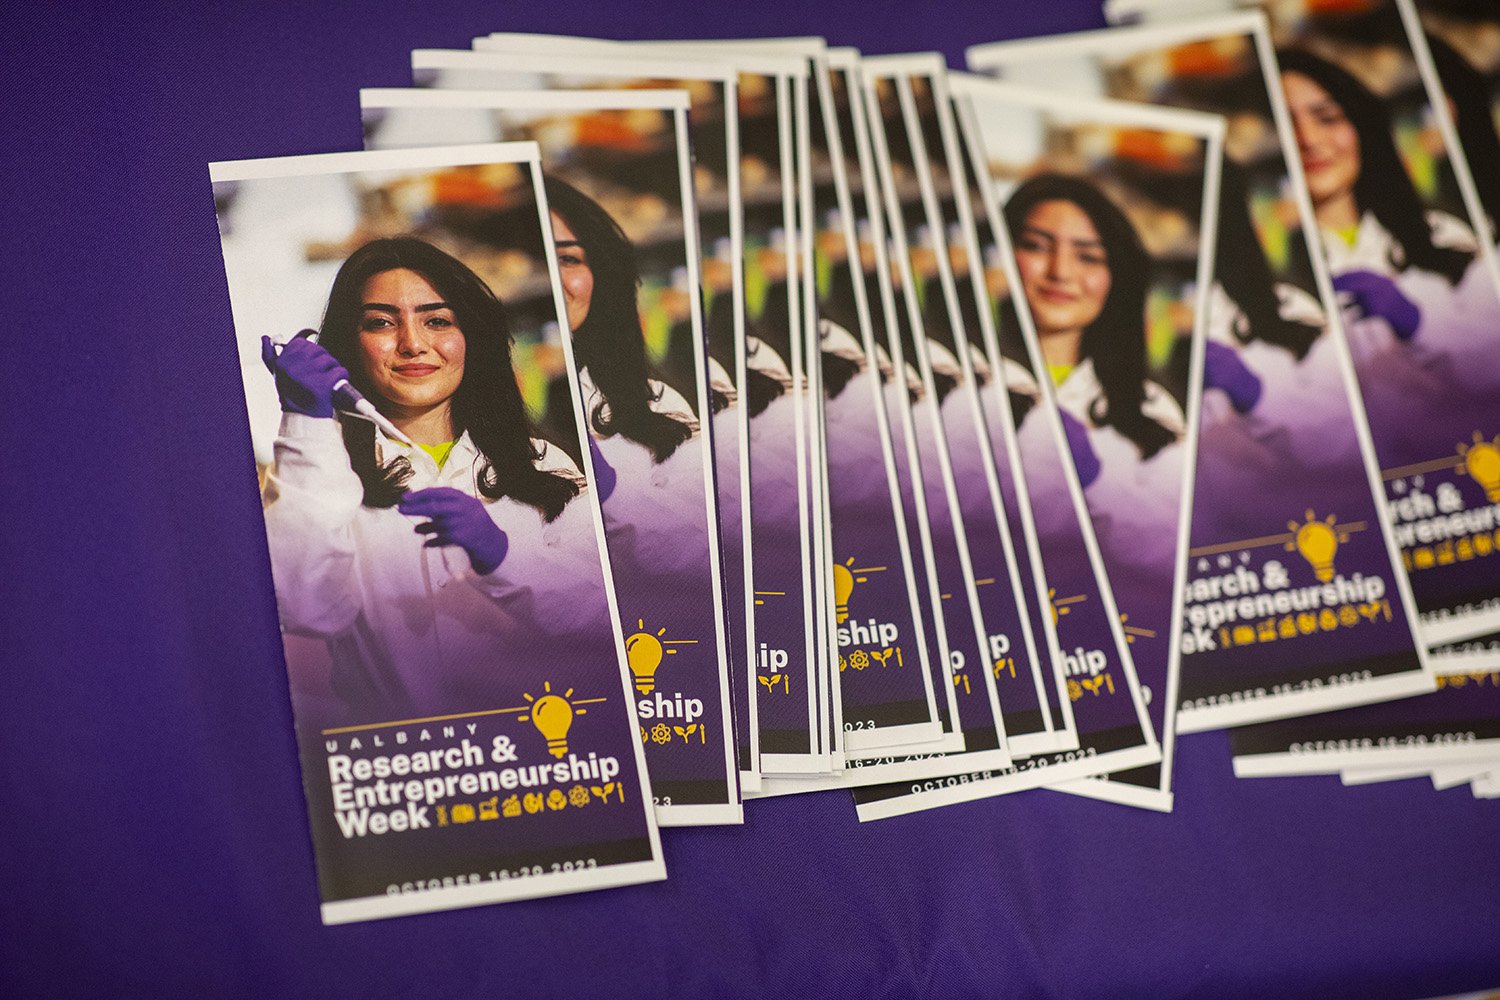 brochures from UAlbany's Research and Entrepreneurship week.